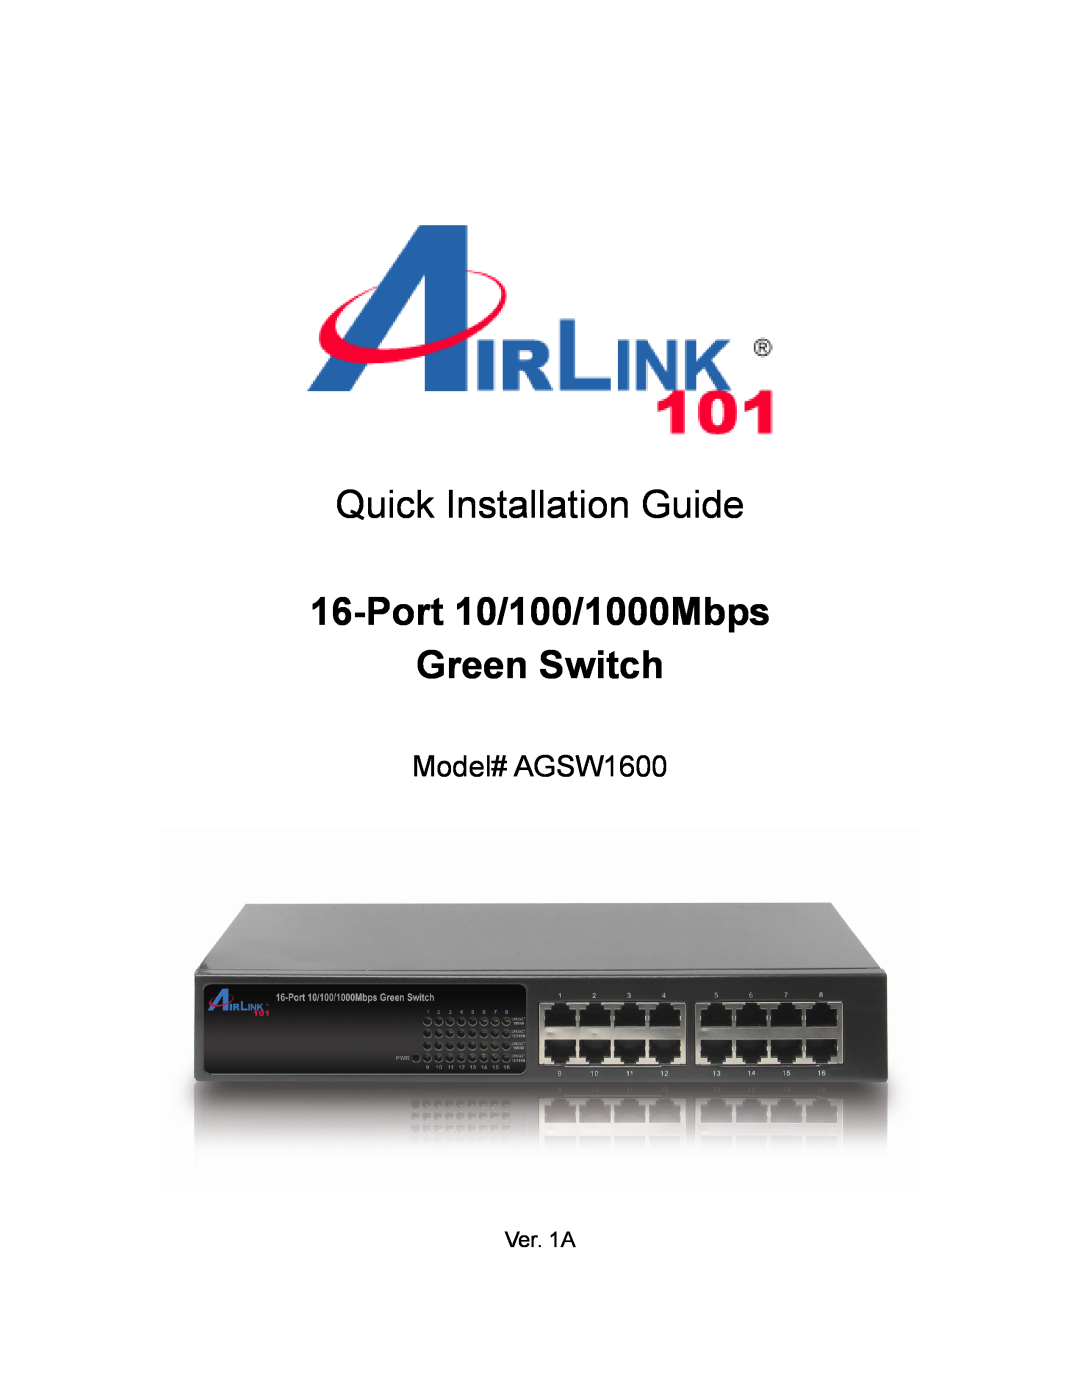 Airlink101 AGSW1600 manual Quick Installation Guide, Port 10/100/1000Mbps Green Switch 